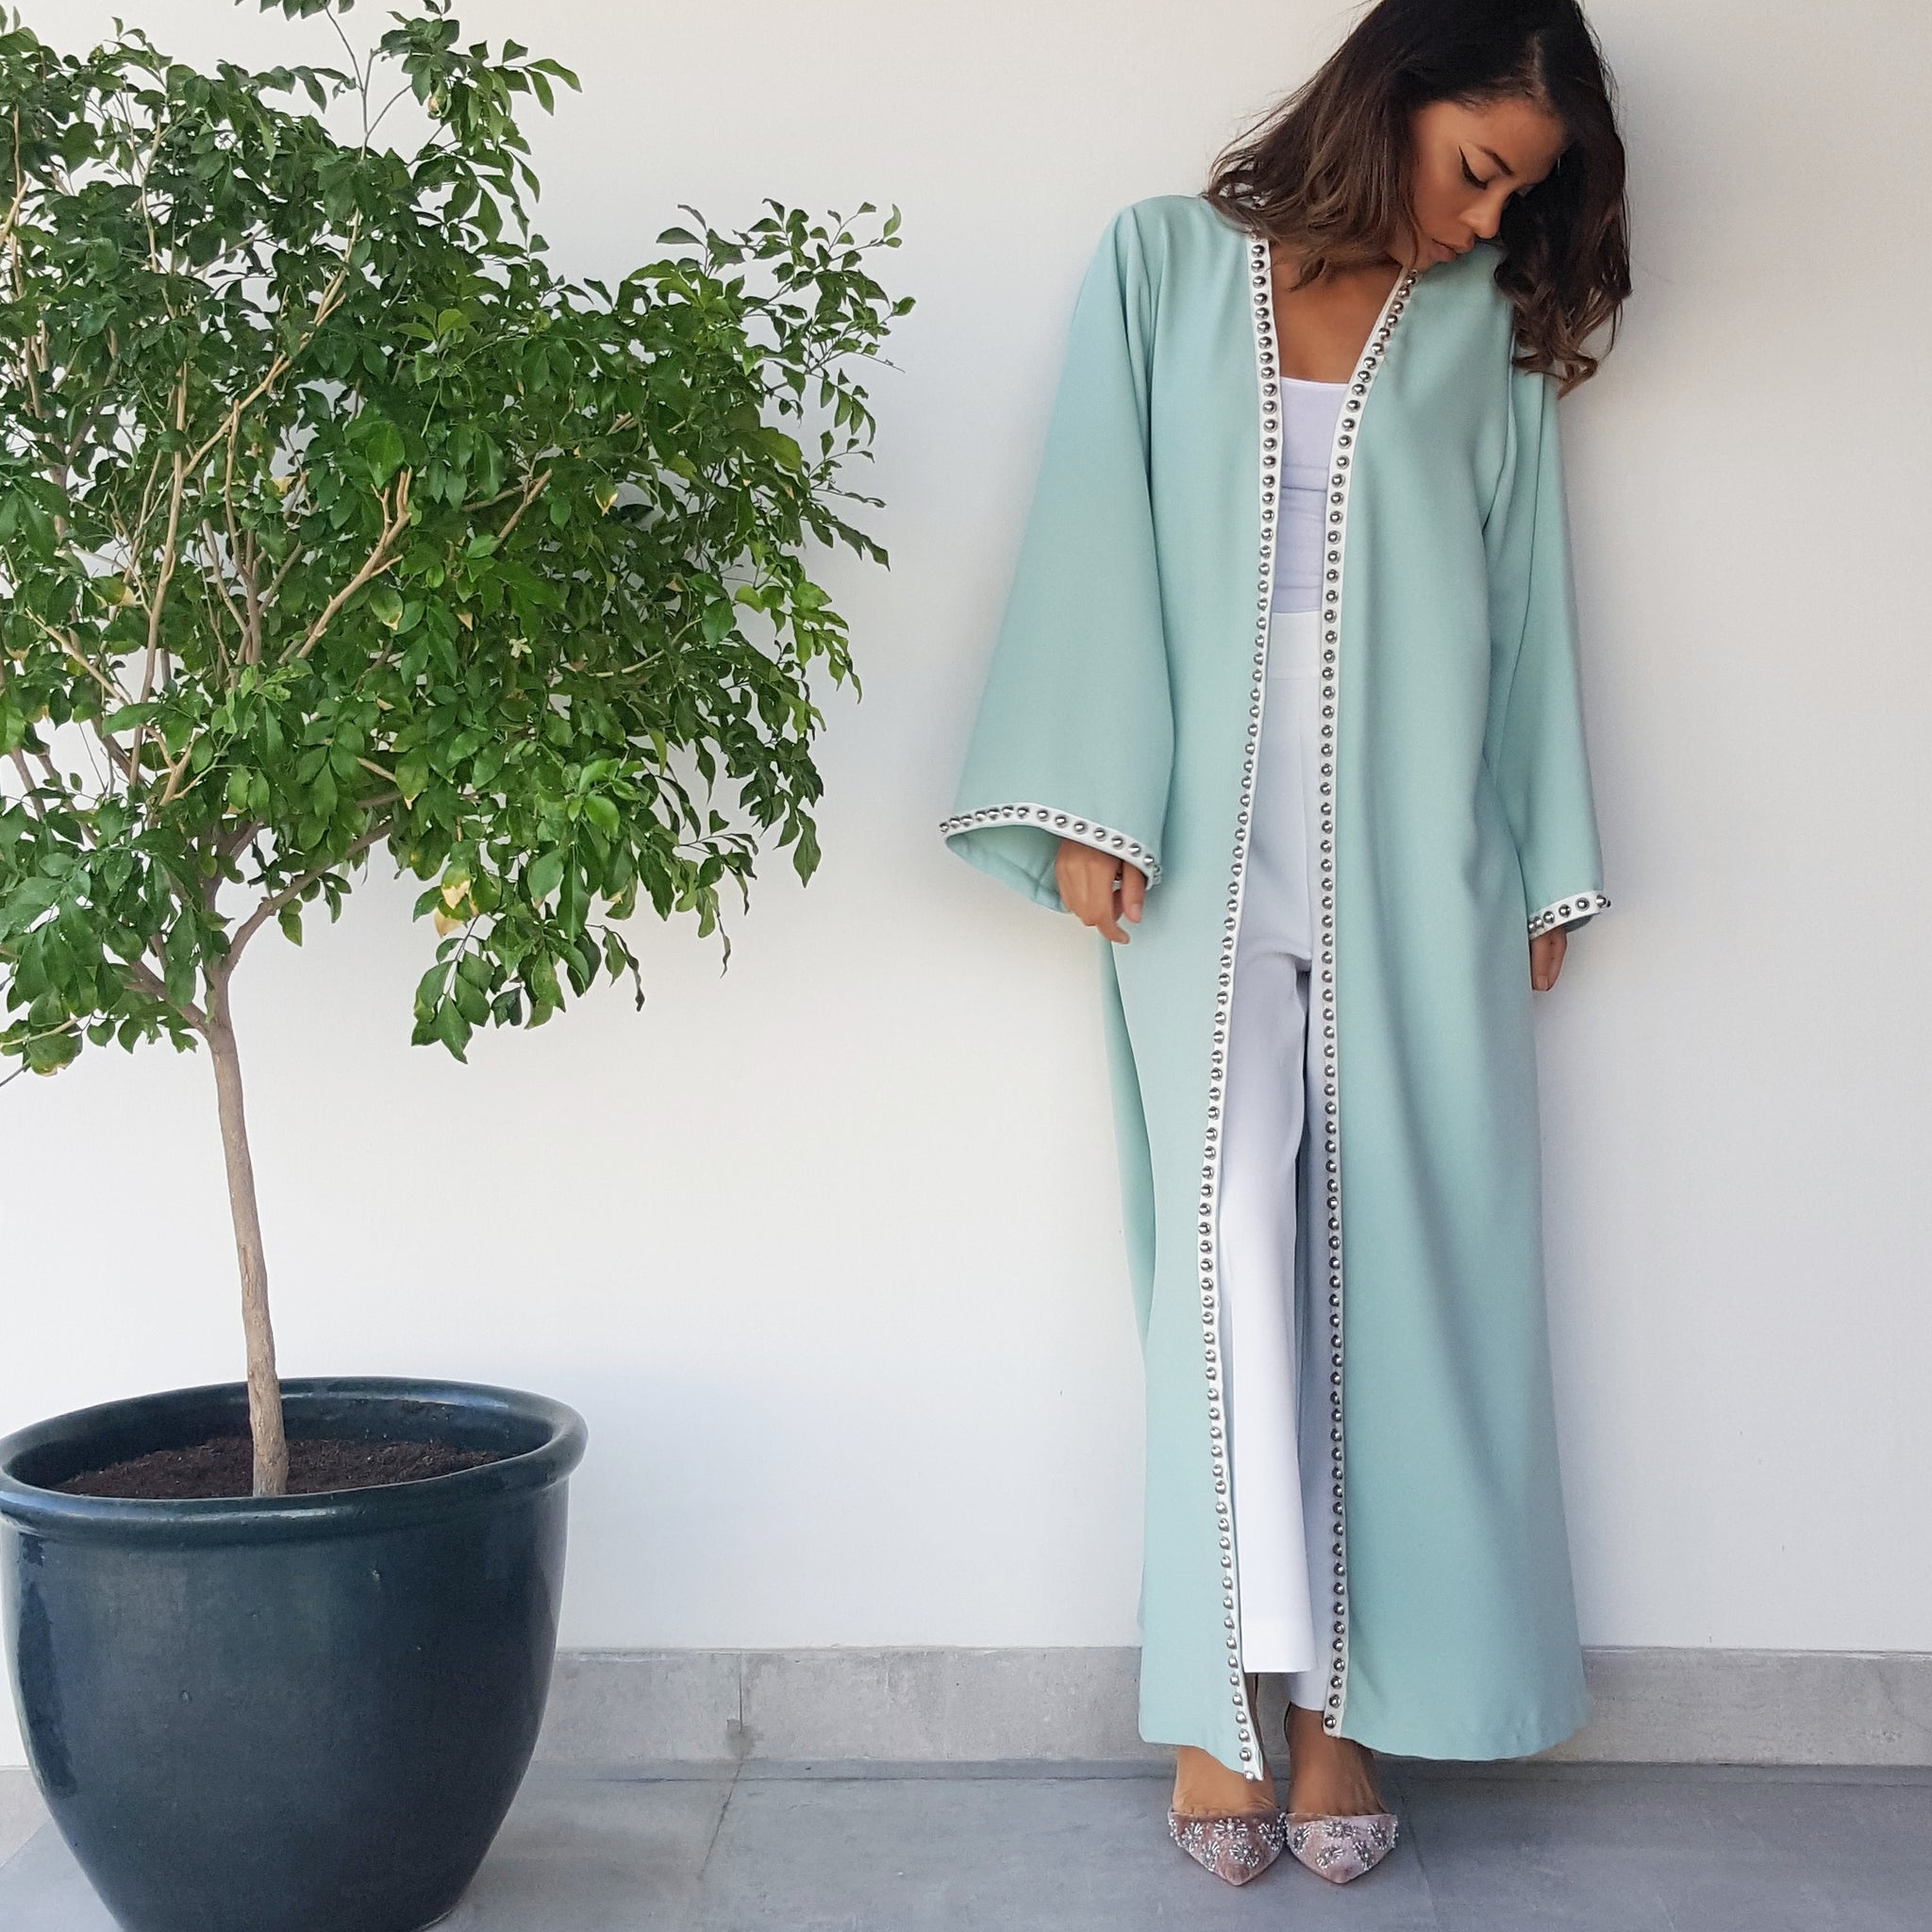 SS18 CREPE ABAYA IN TIFFANY BLUE WITH SILVER METAL STUD